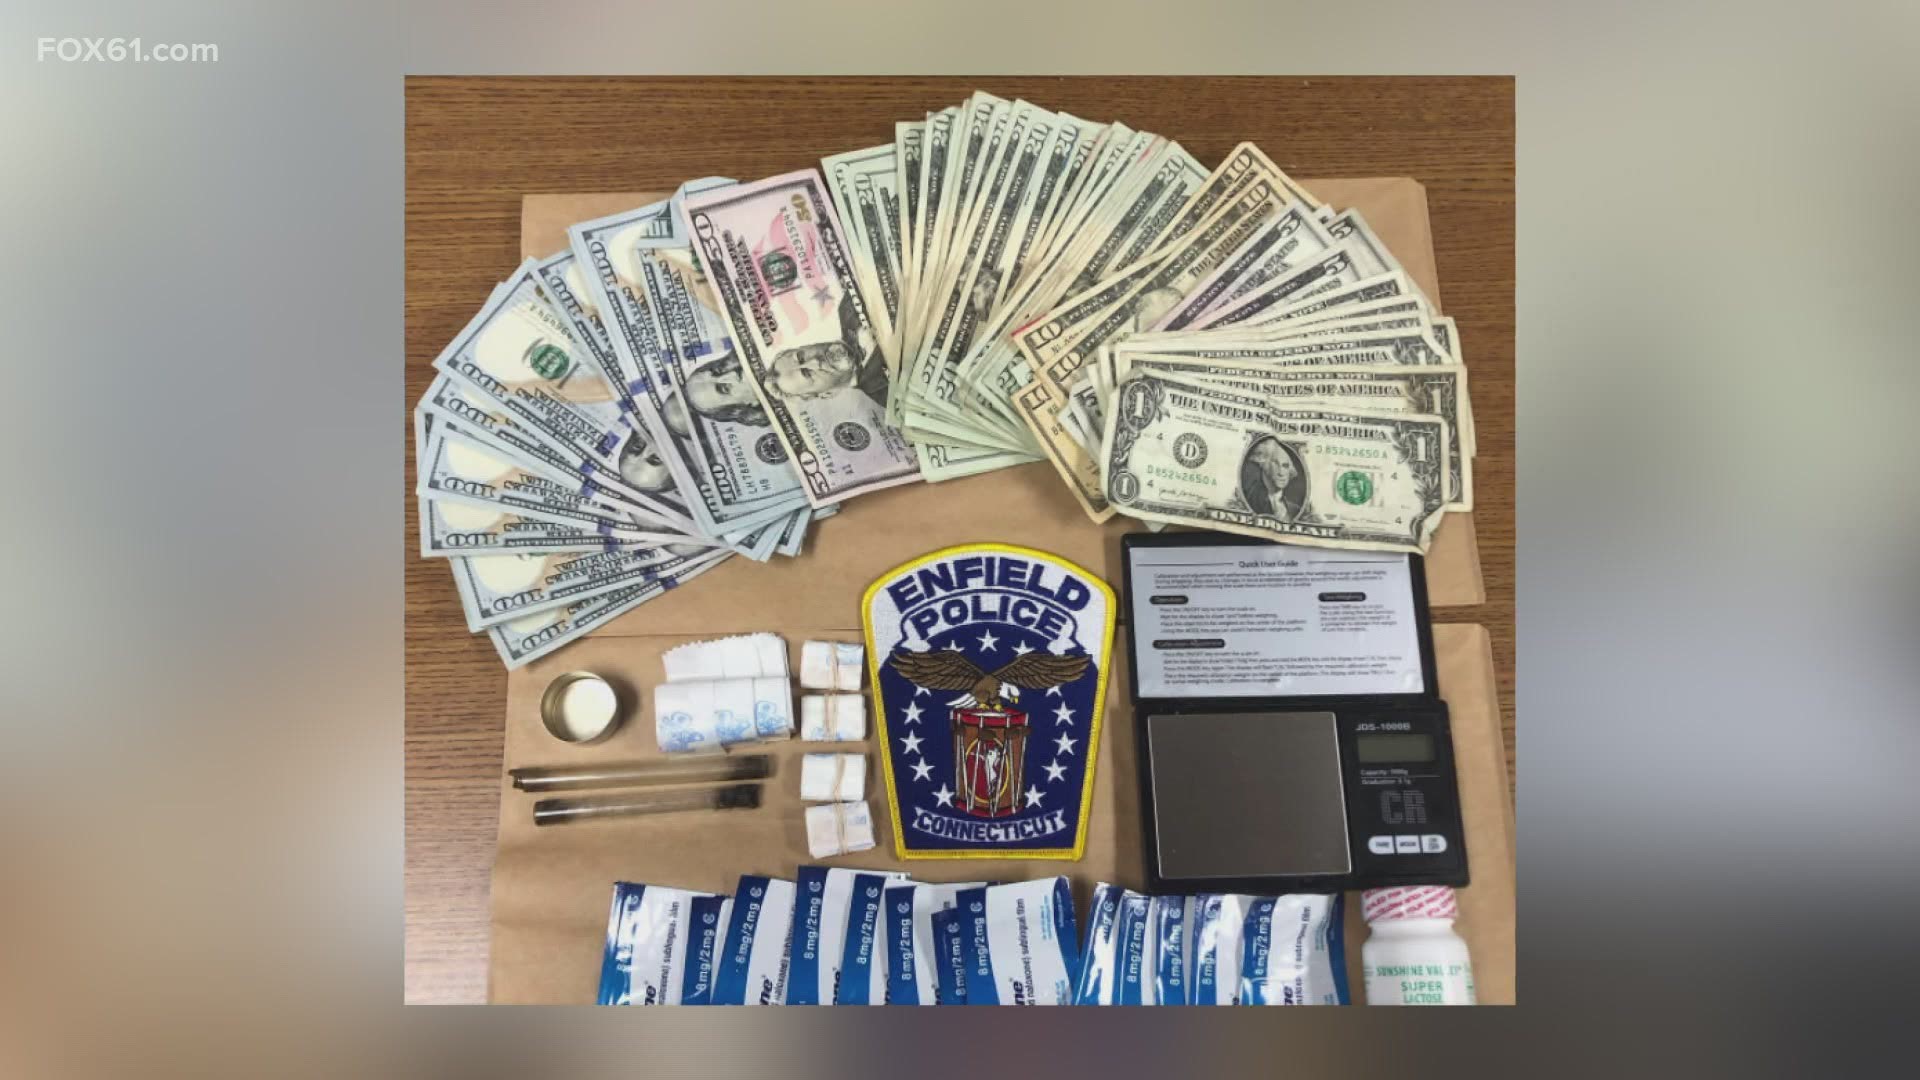 Police said the heroin, a large amount of cash, a scale, and other drug paraphernalia was seized.